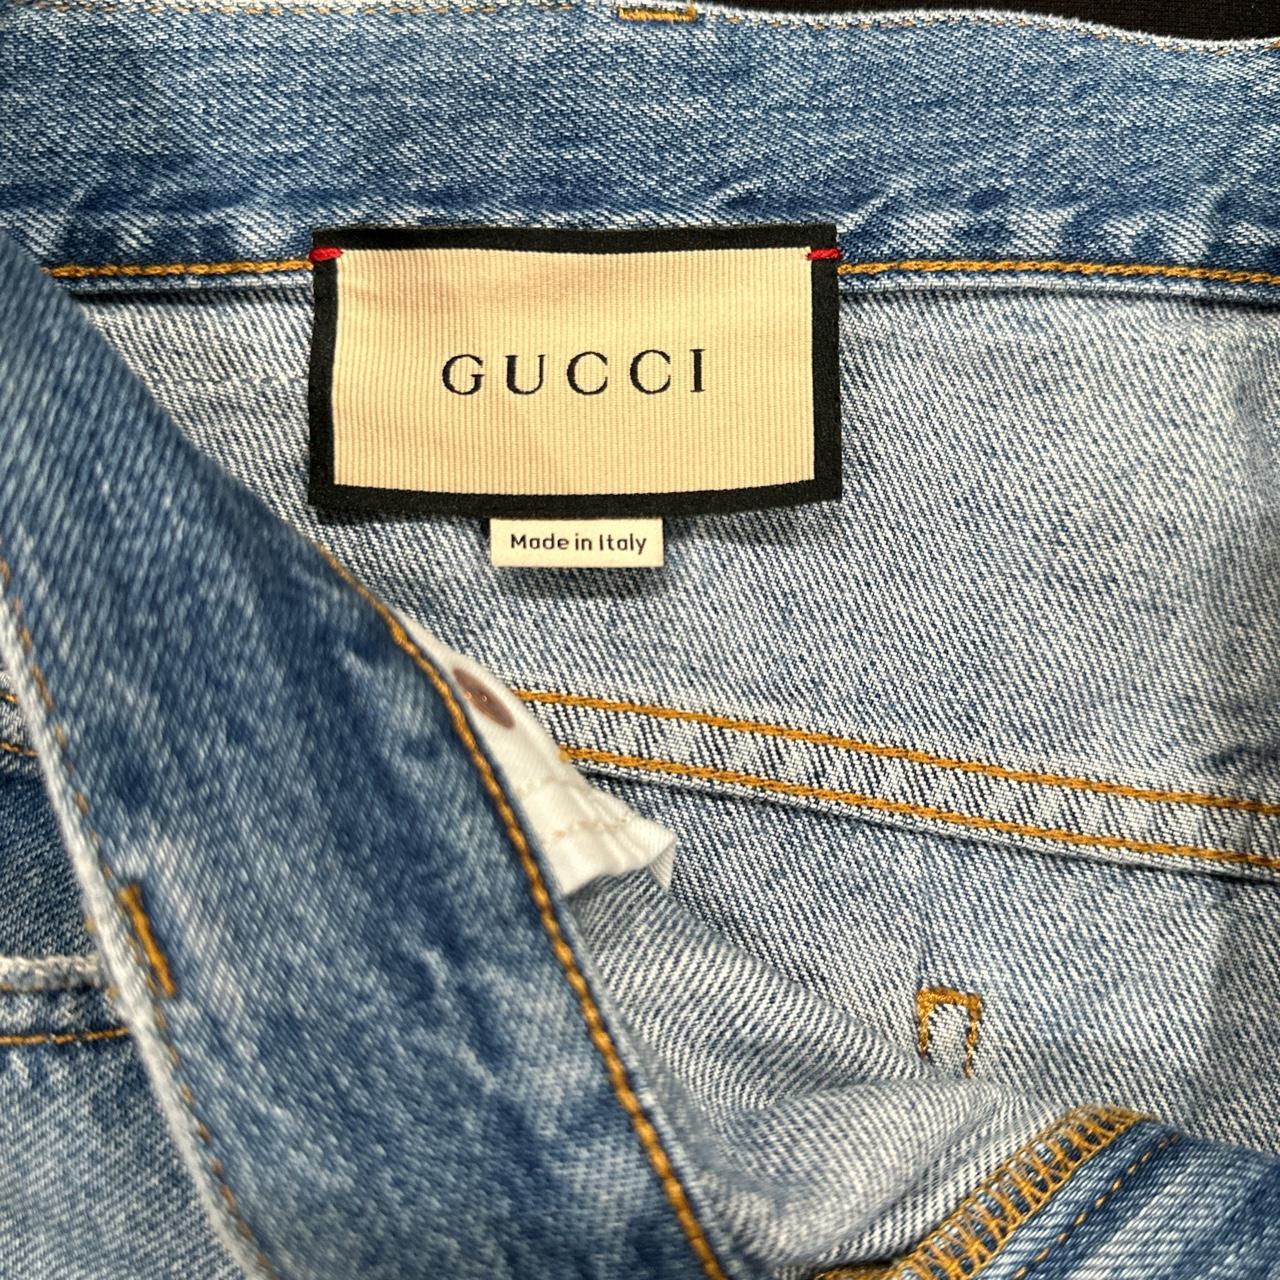 Gucci jeans Barely Price negotiable - Depop